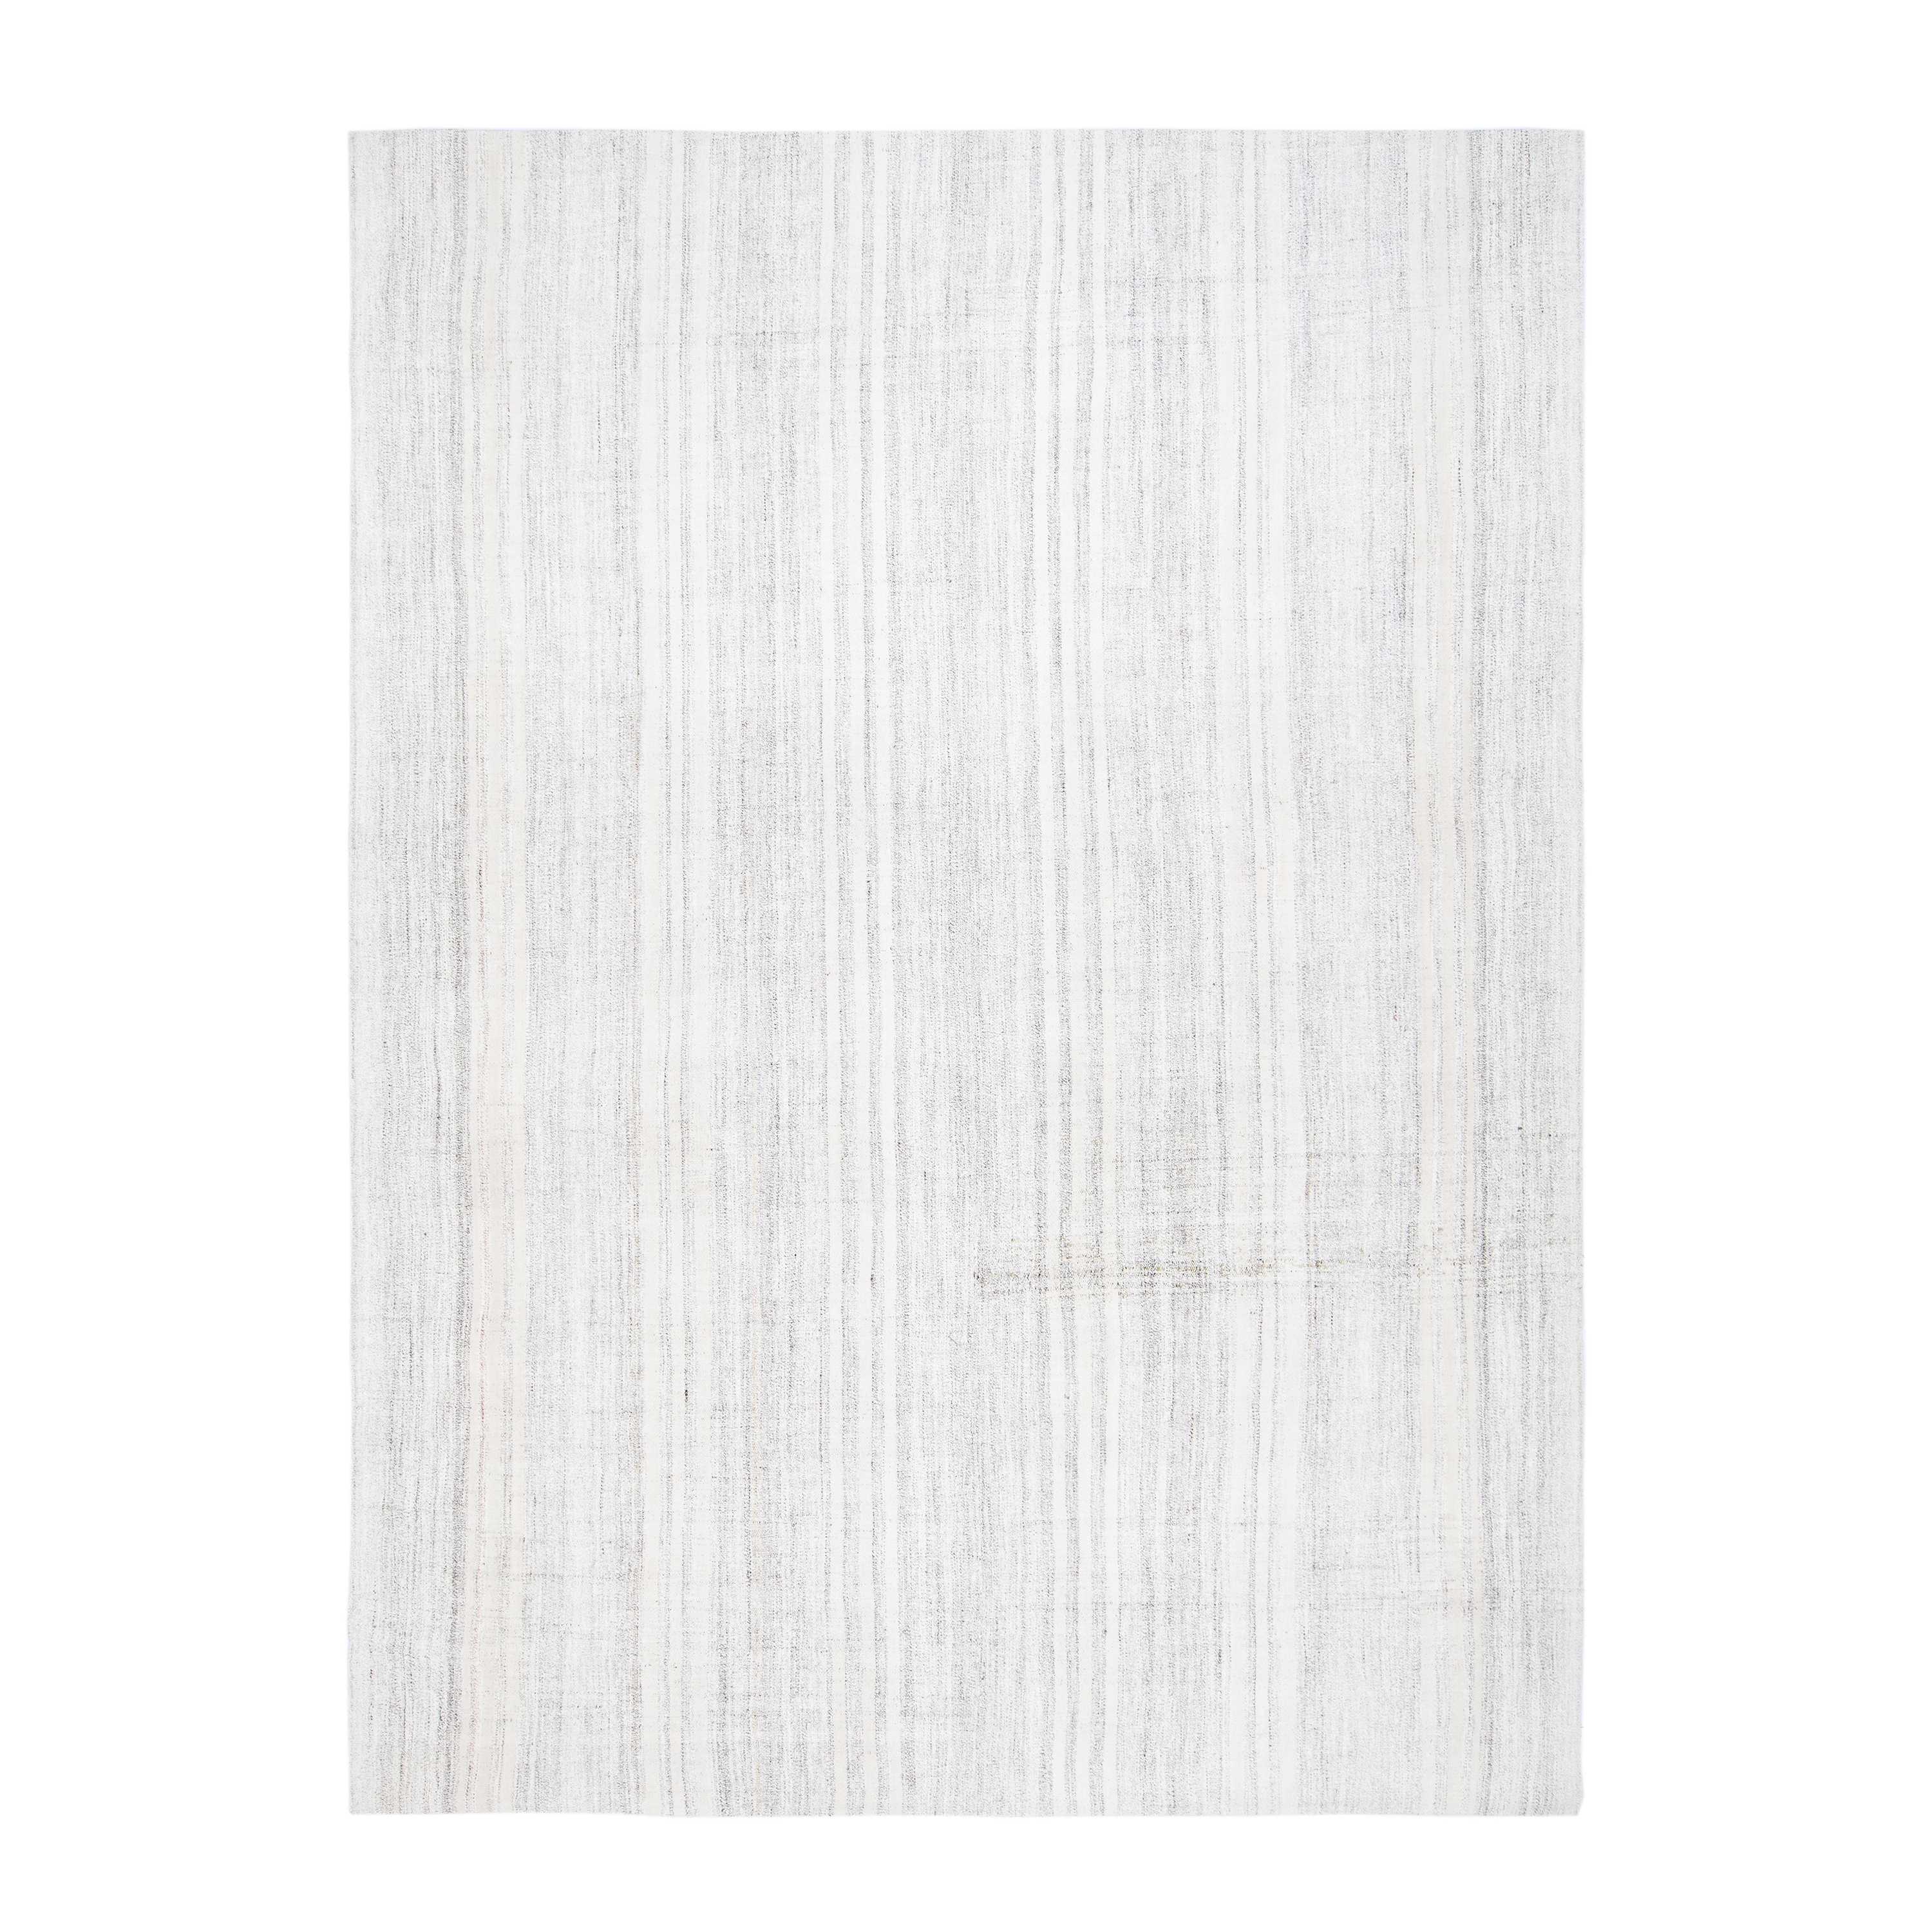 This flatweave Stripe rug is hand-woven and made with 100% wool.